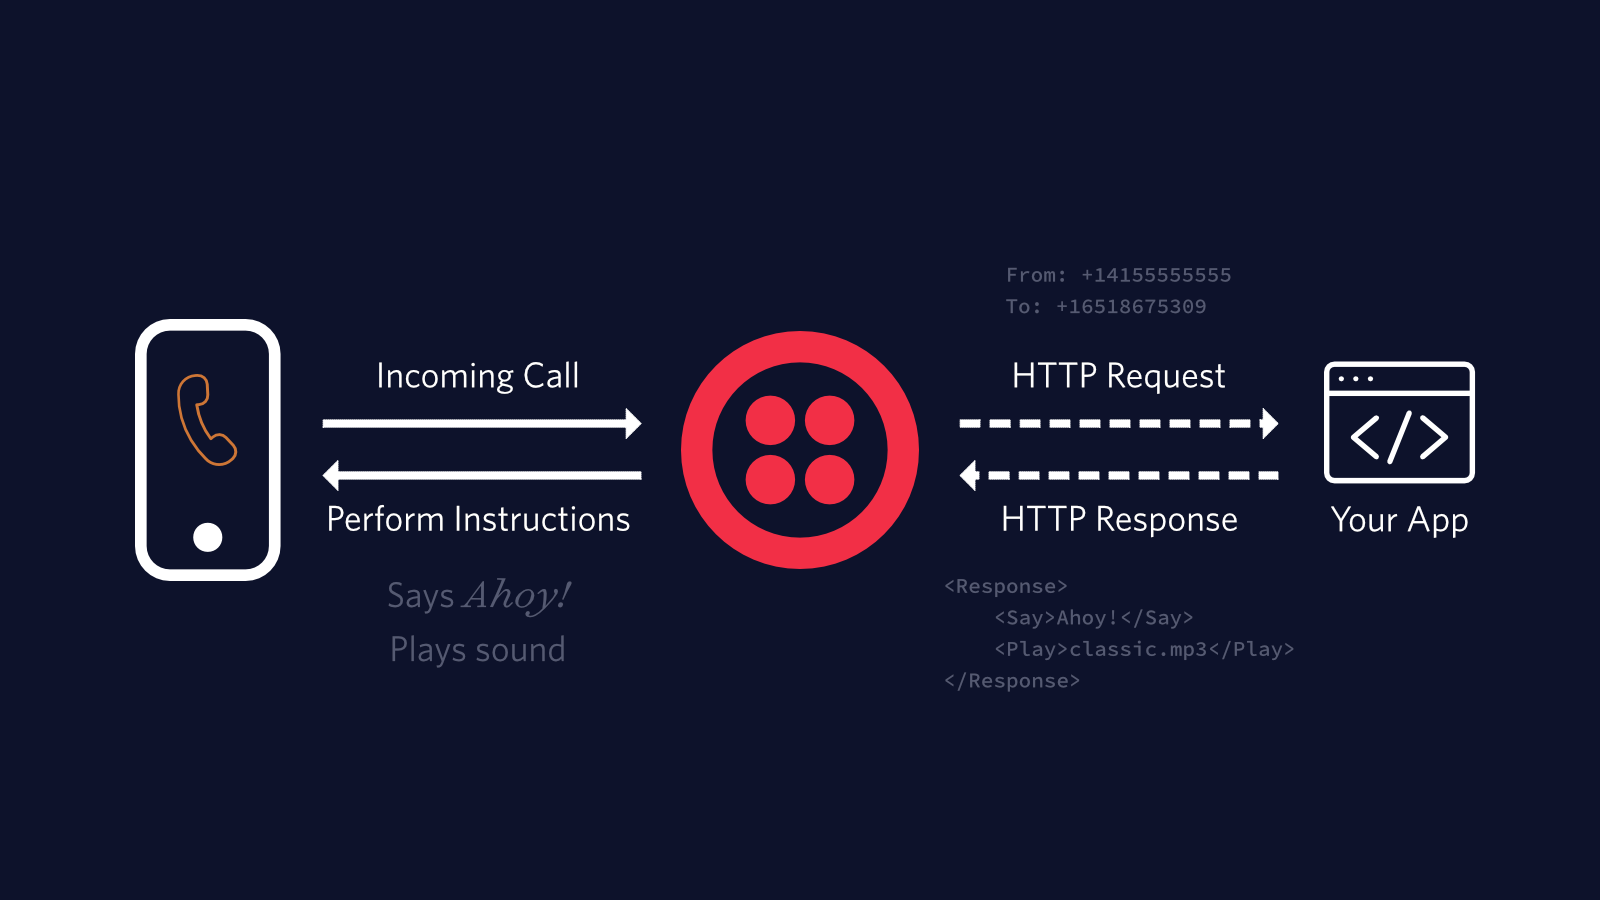 schema of how Twilio interacts with your application to handle phone calls